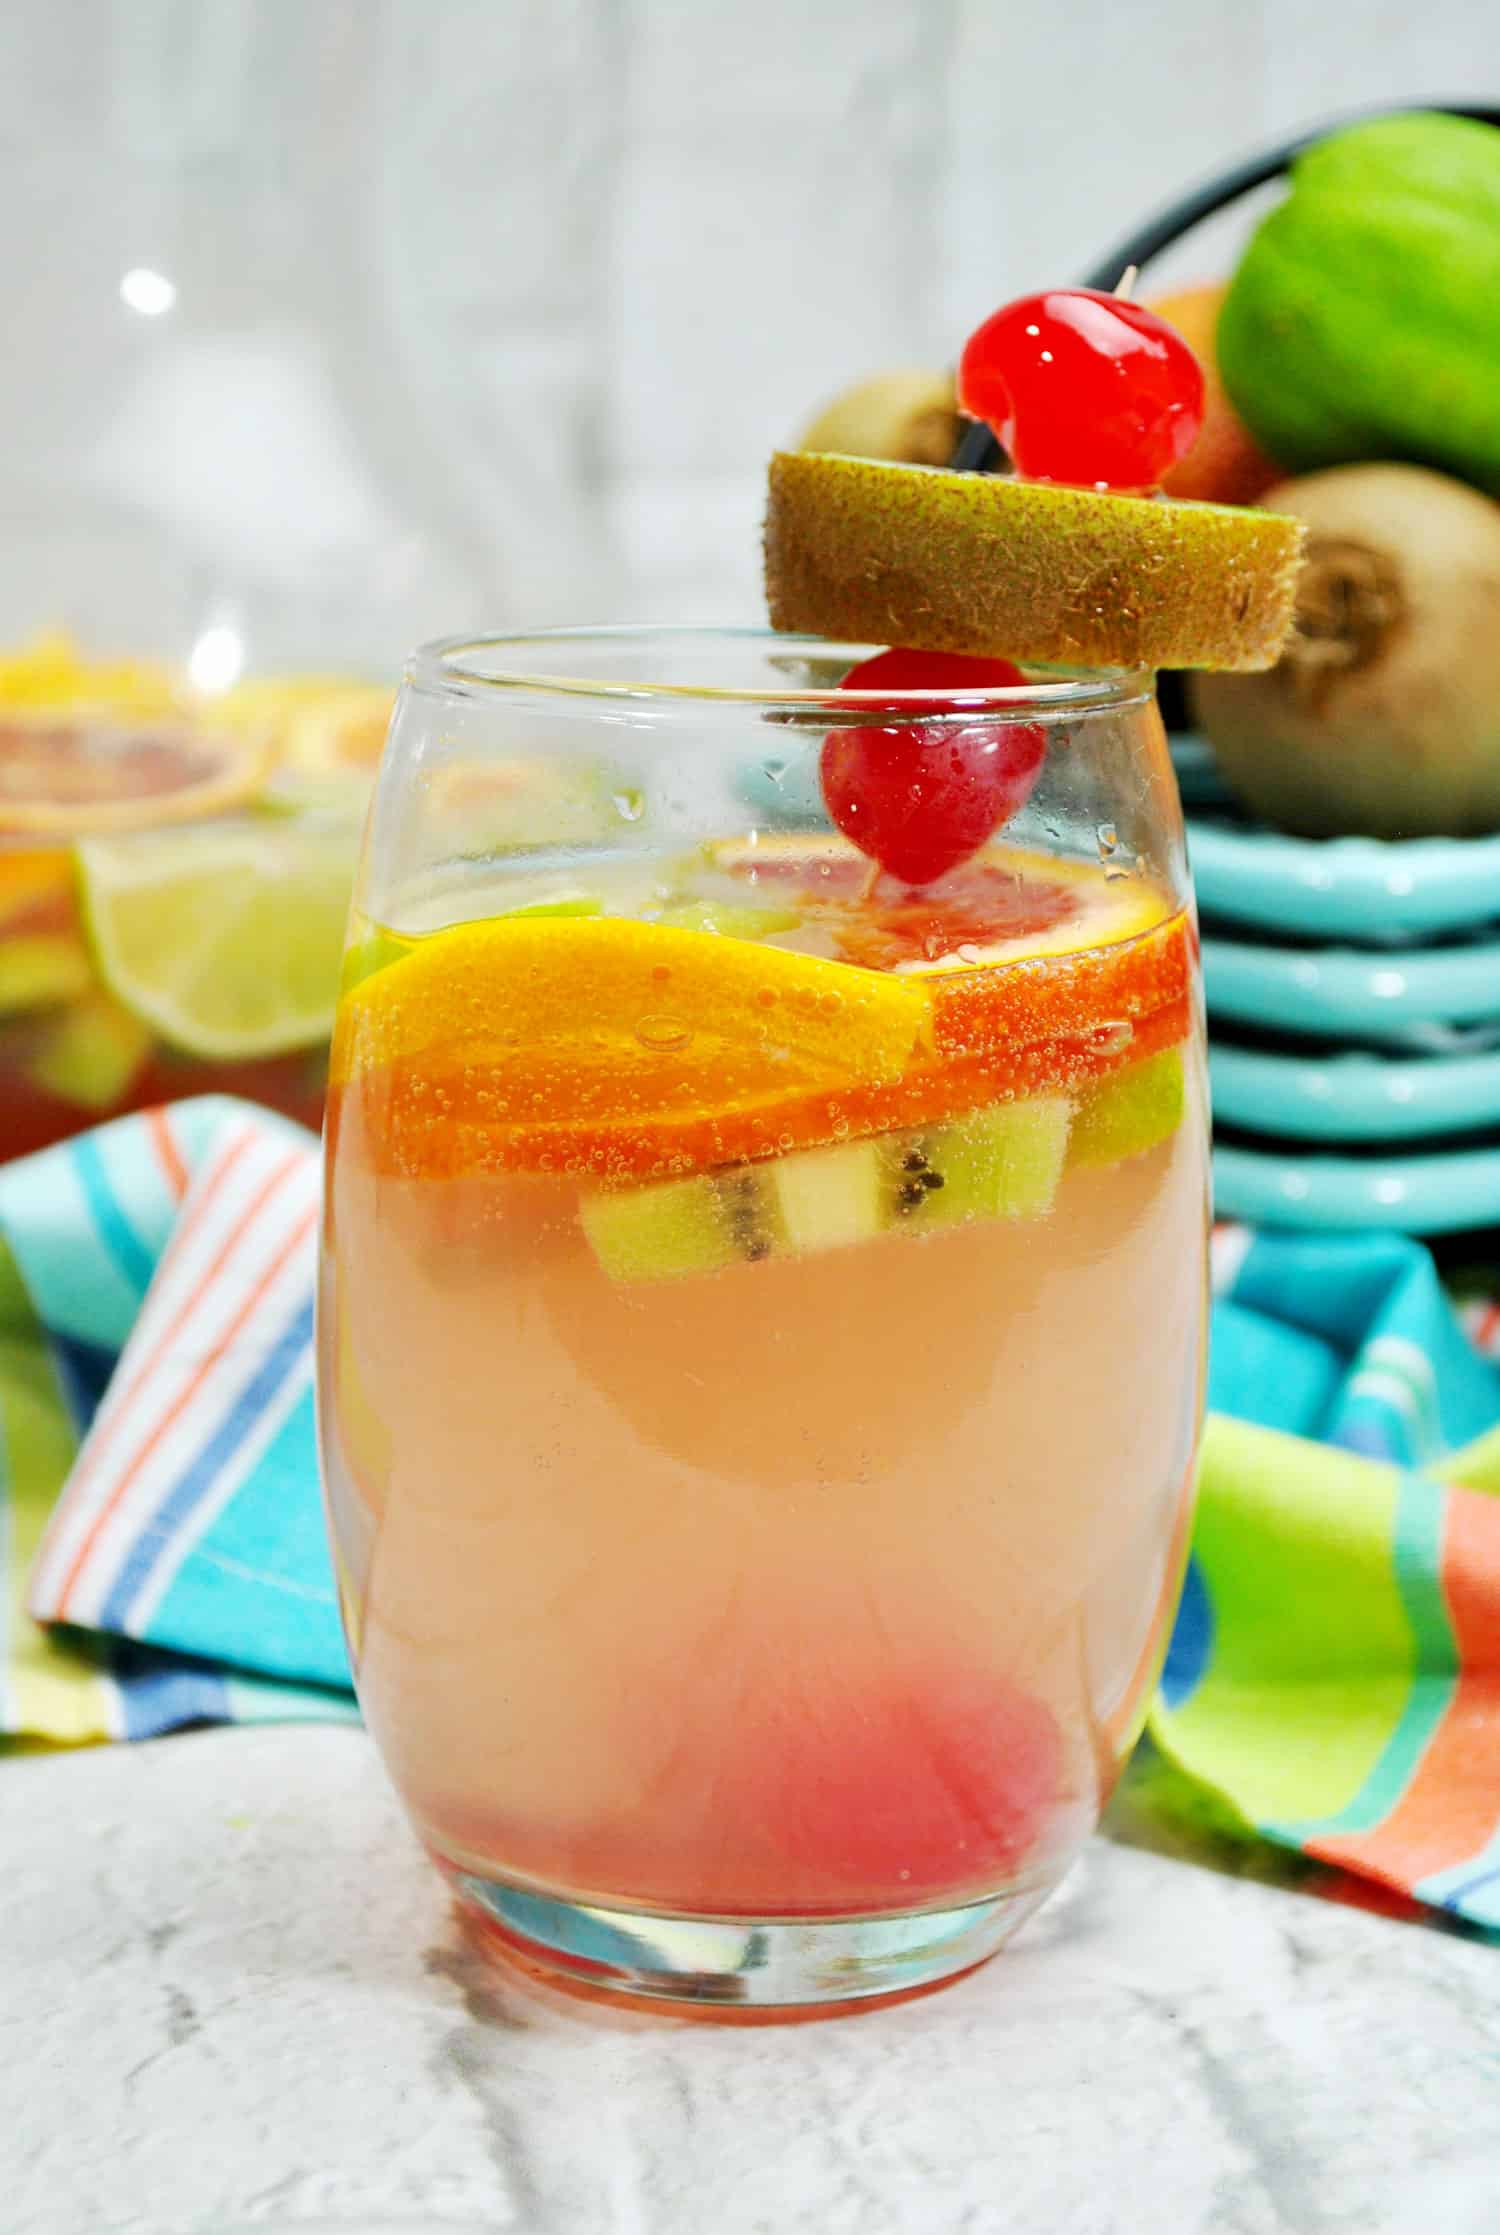 up close picture of clear glass with peach color tropical fruity sangria recipe in it garnished with oranges, cherries and kiwi